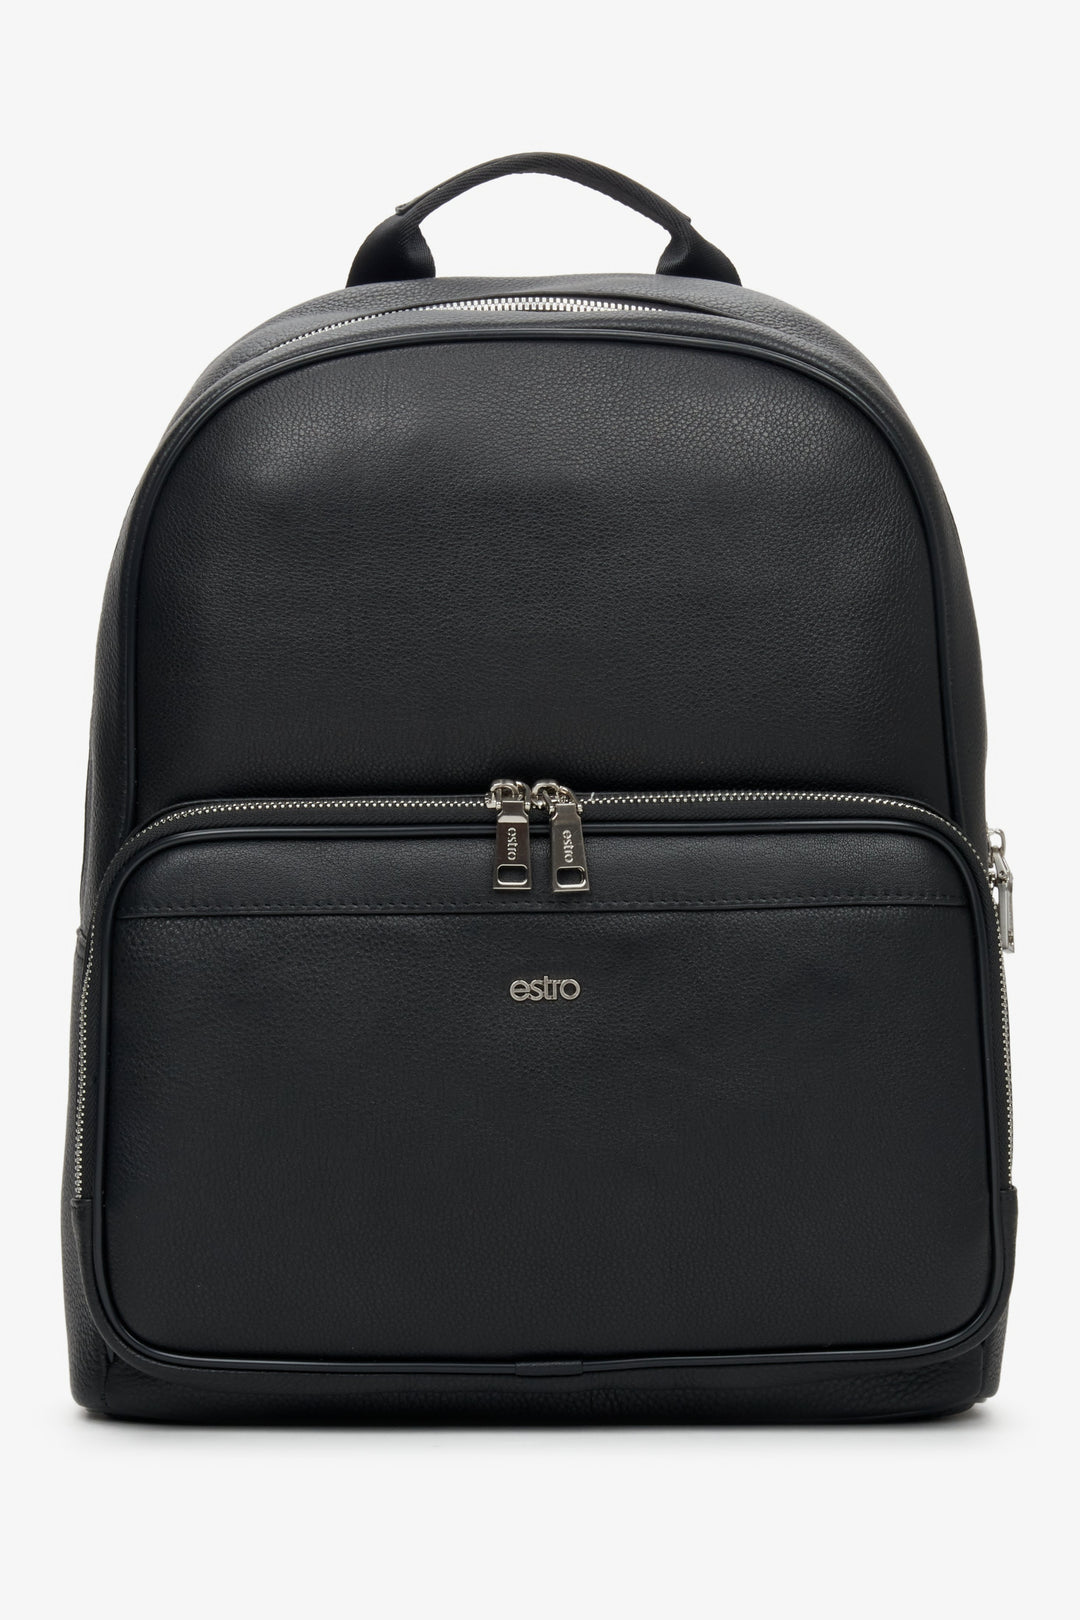 Men's black leather backpack with silver fittings.